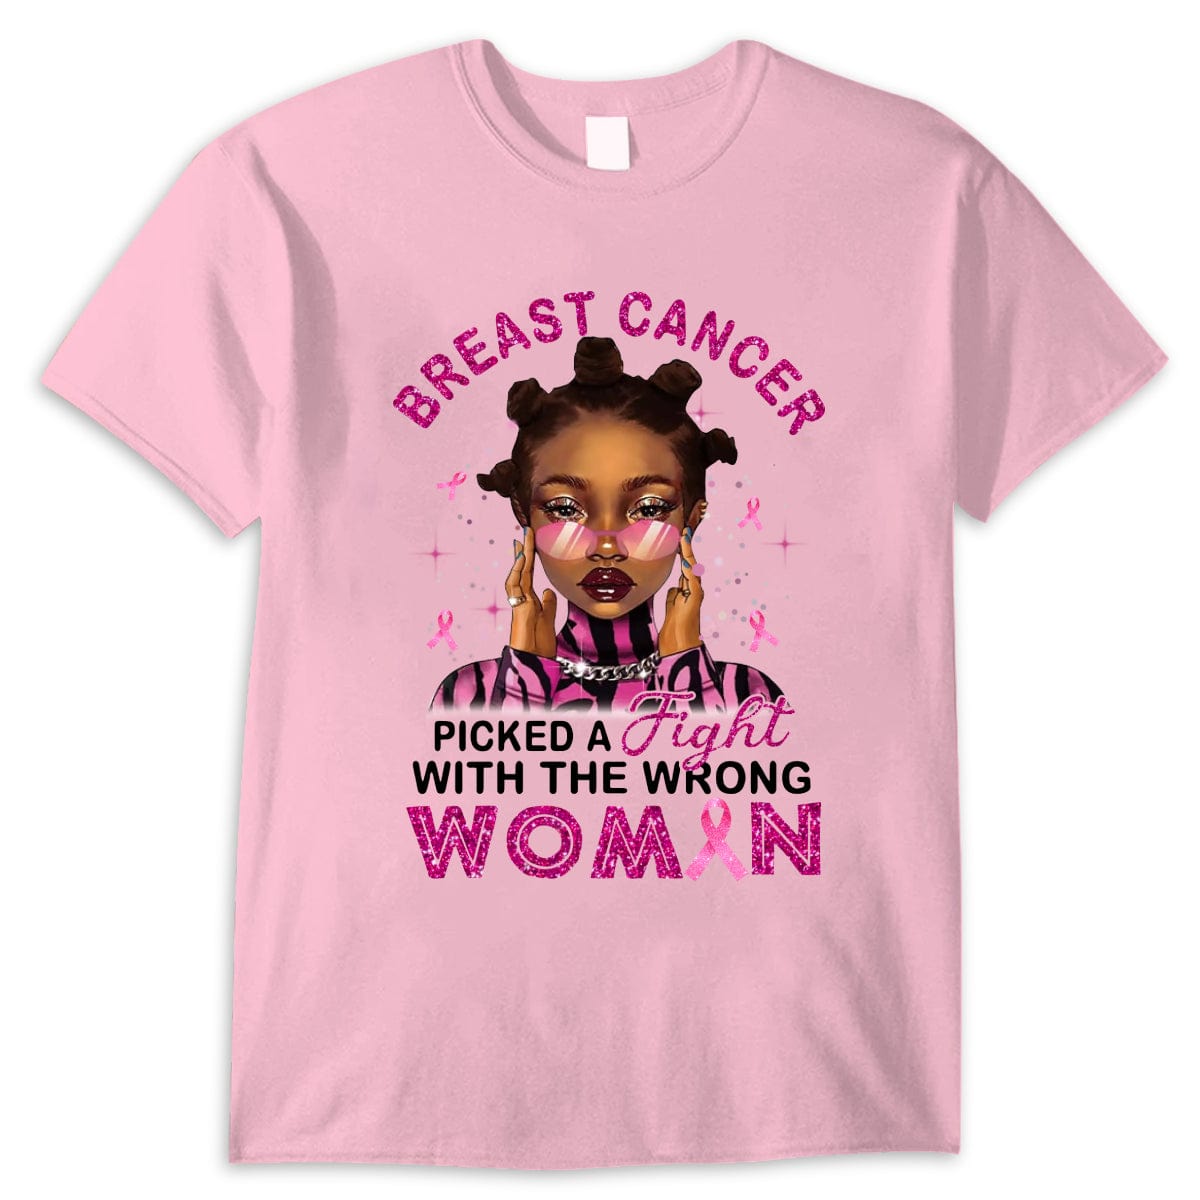 Breast Cancer Picked A Fight With The Wrong Woman Shirts